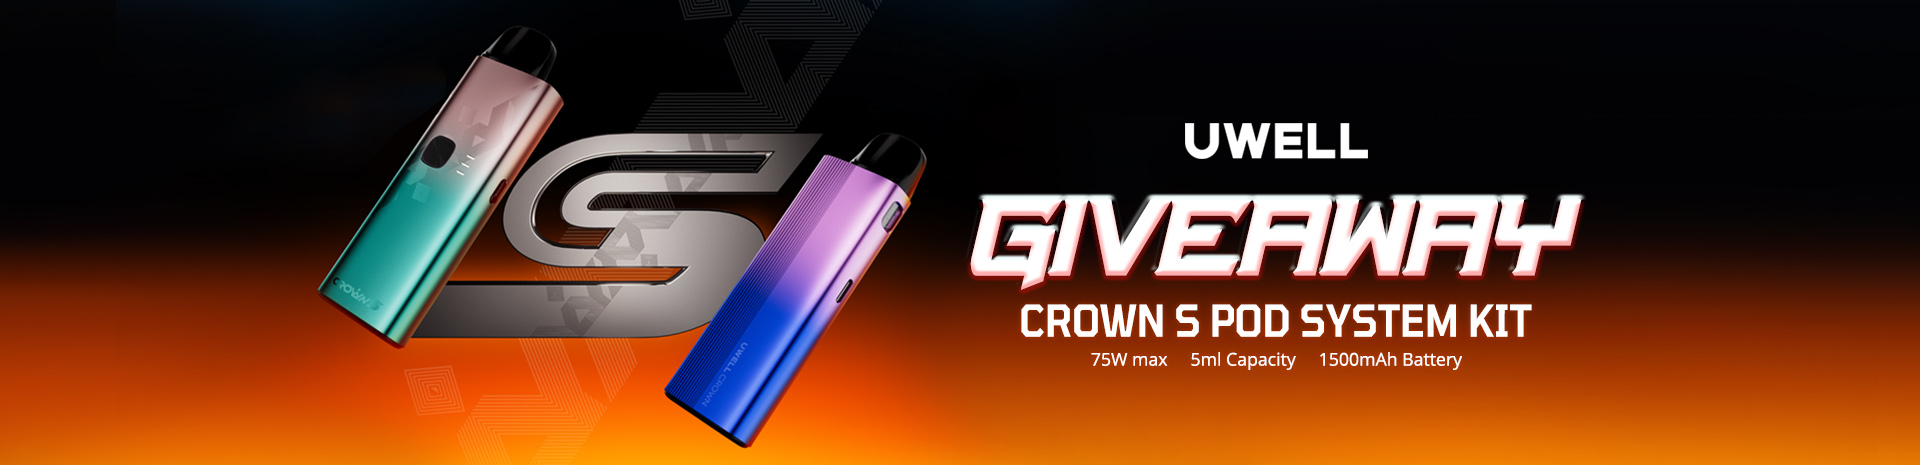 Uwell Crown S Pod Kit Giveaway